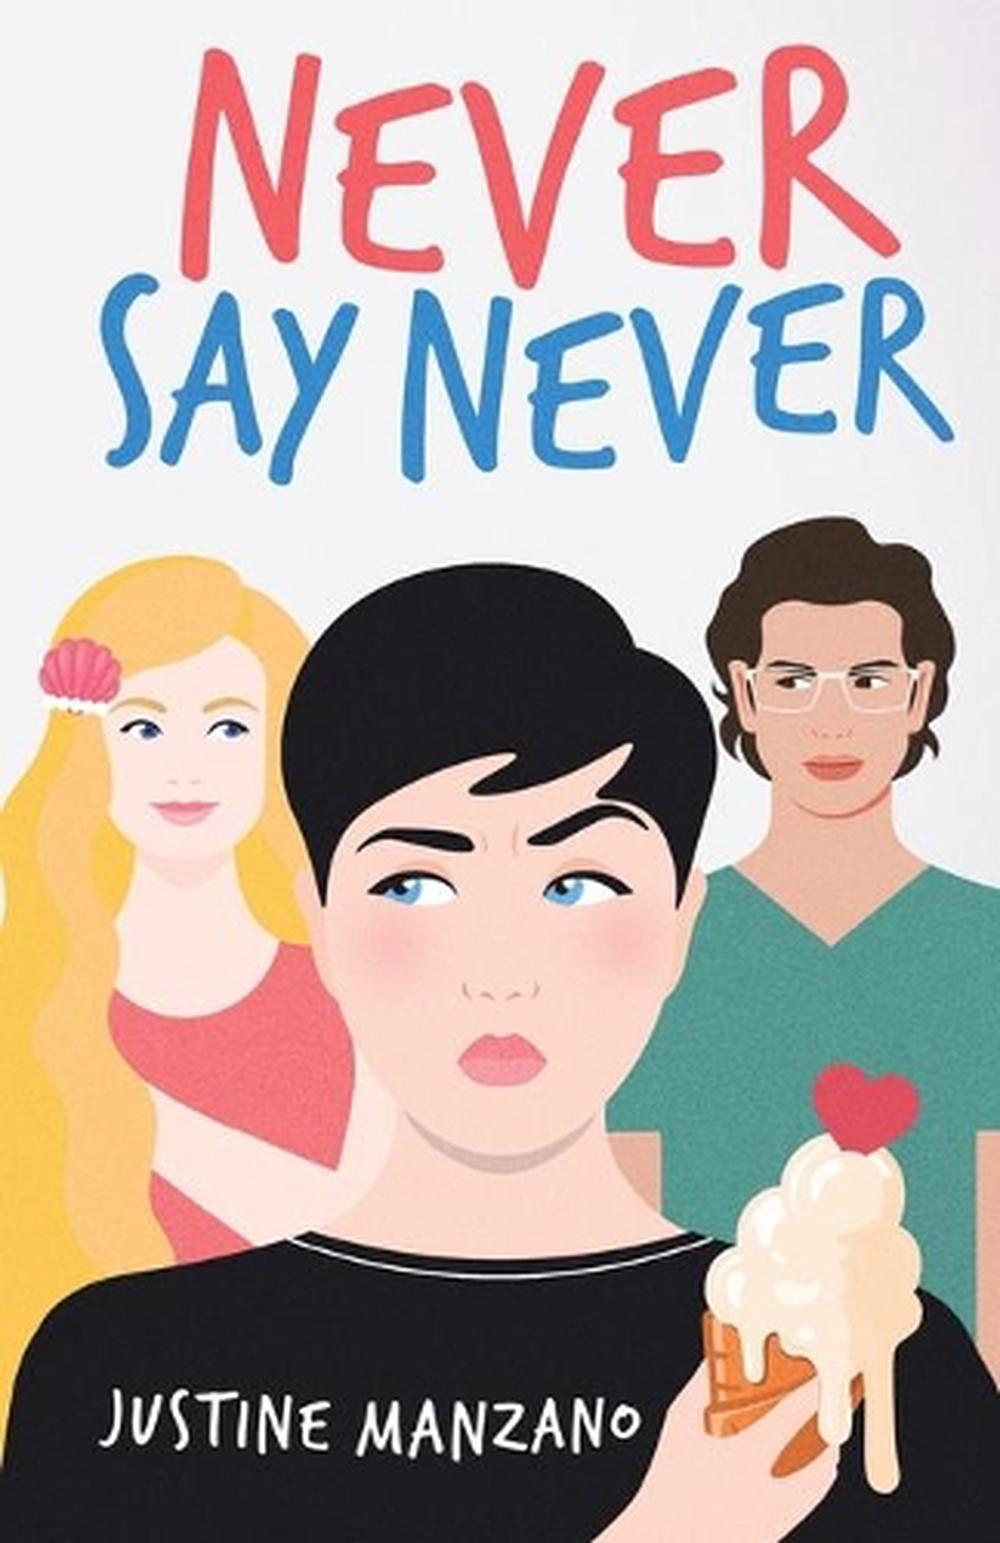 Never Say Never by Justine Manzano